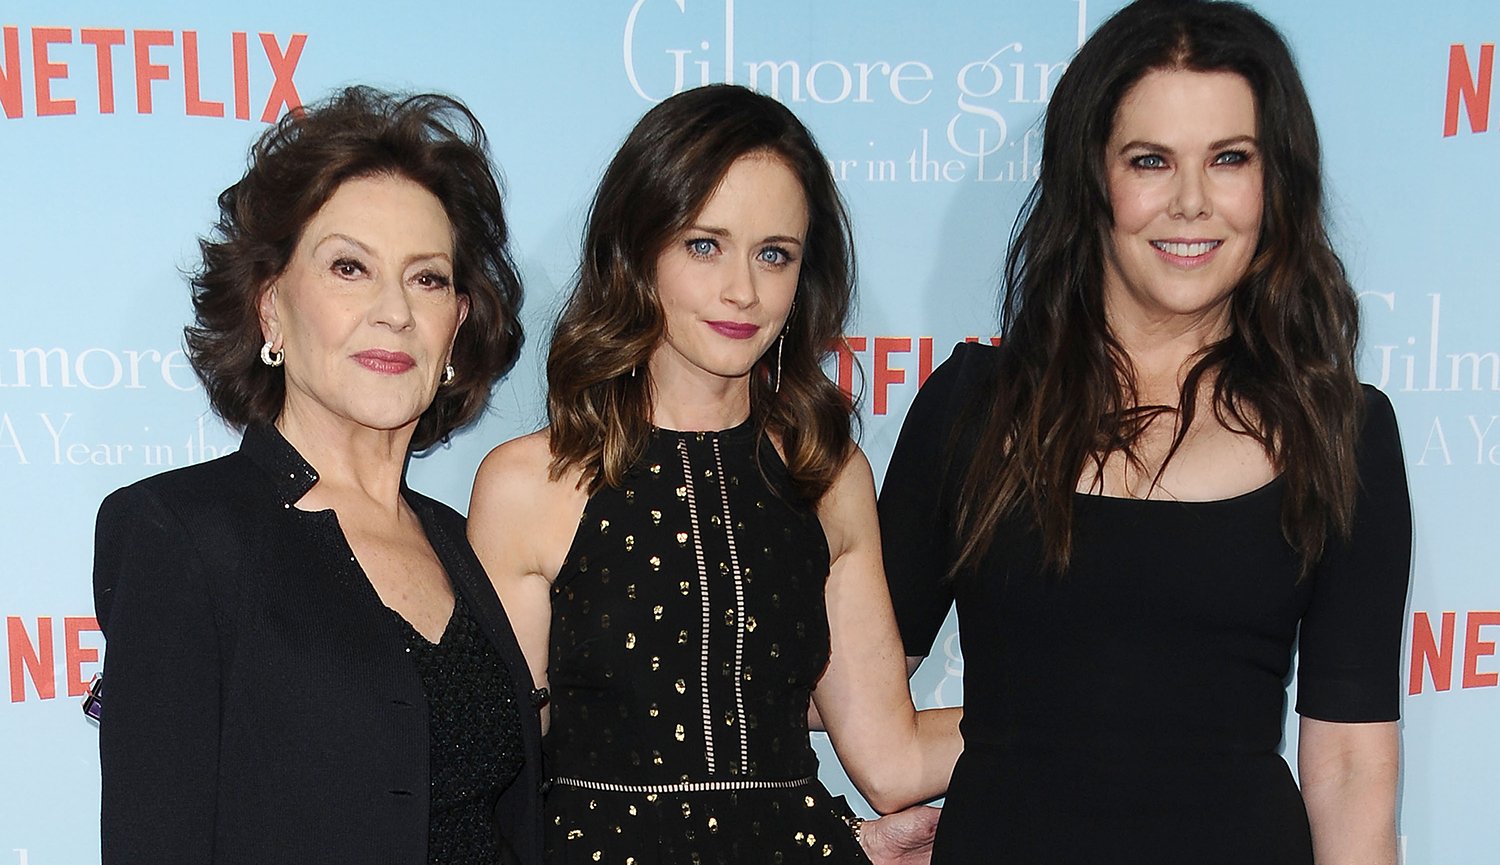 Gilmore Girls cast members Kelly Bishop, Alexis Bledel, and Lorelai Gilmore, who make up the Gilmore family